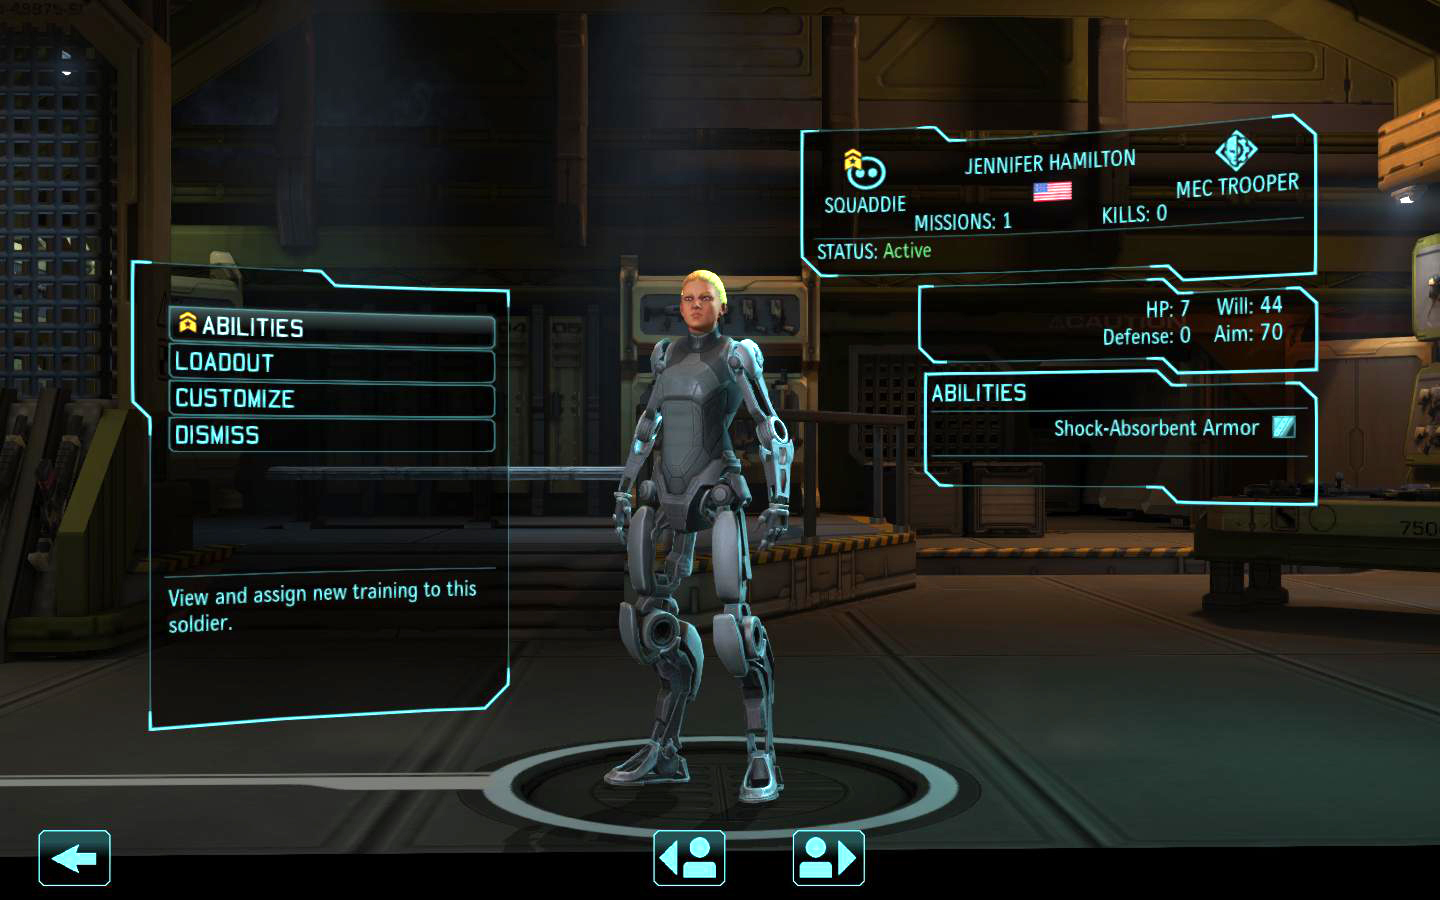 research xcom enemy within